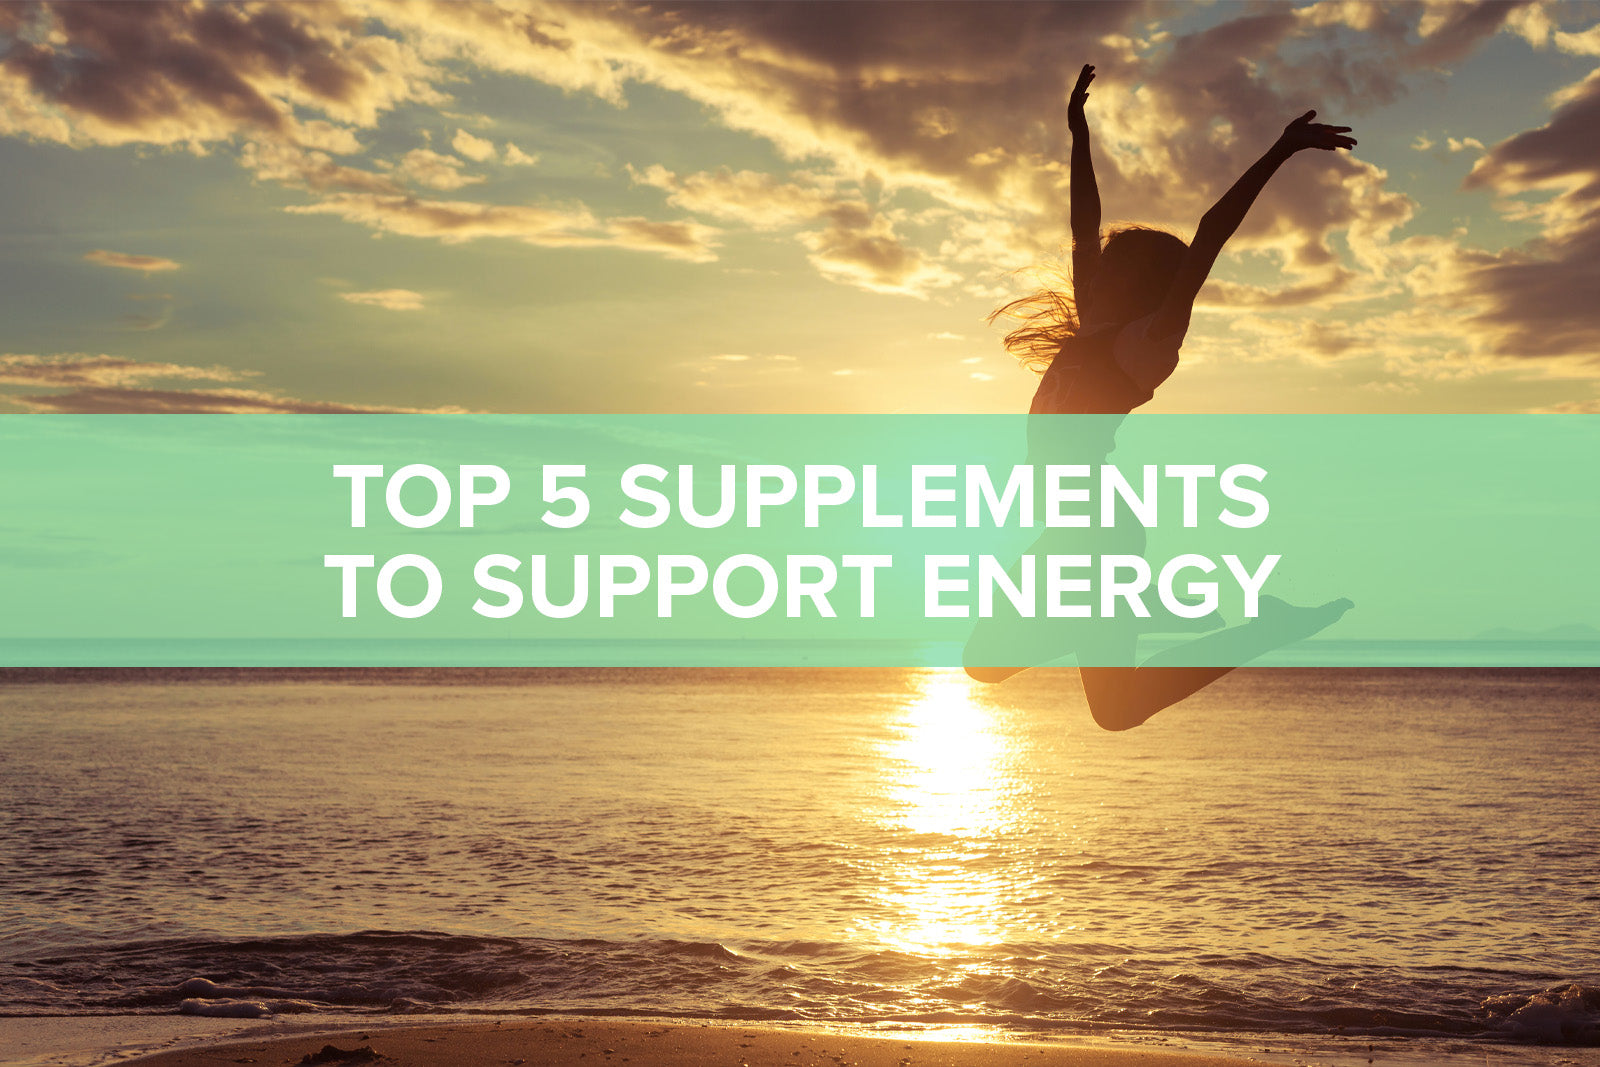 The Top 5 Vitamins and Supplements to Support Energy